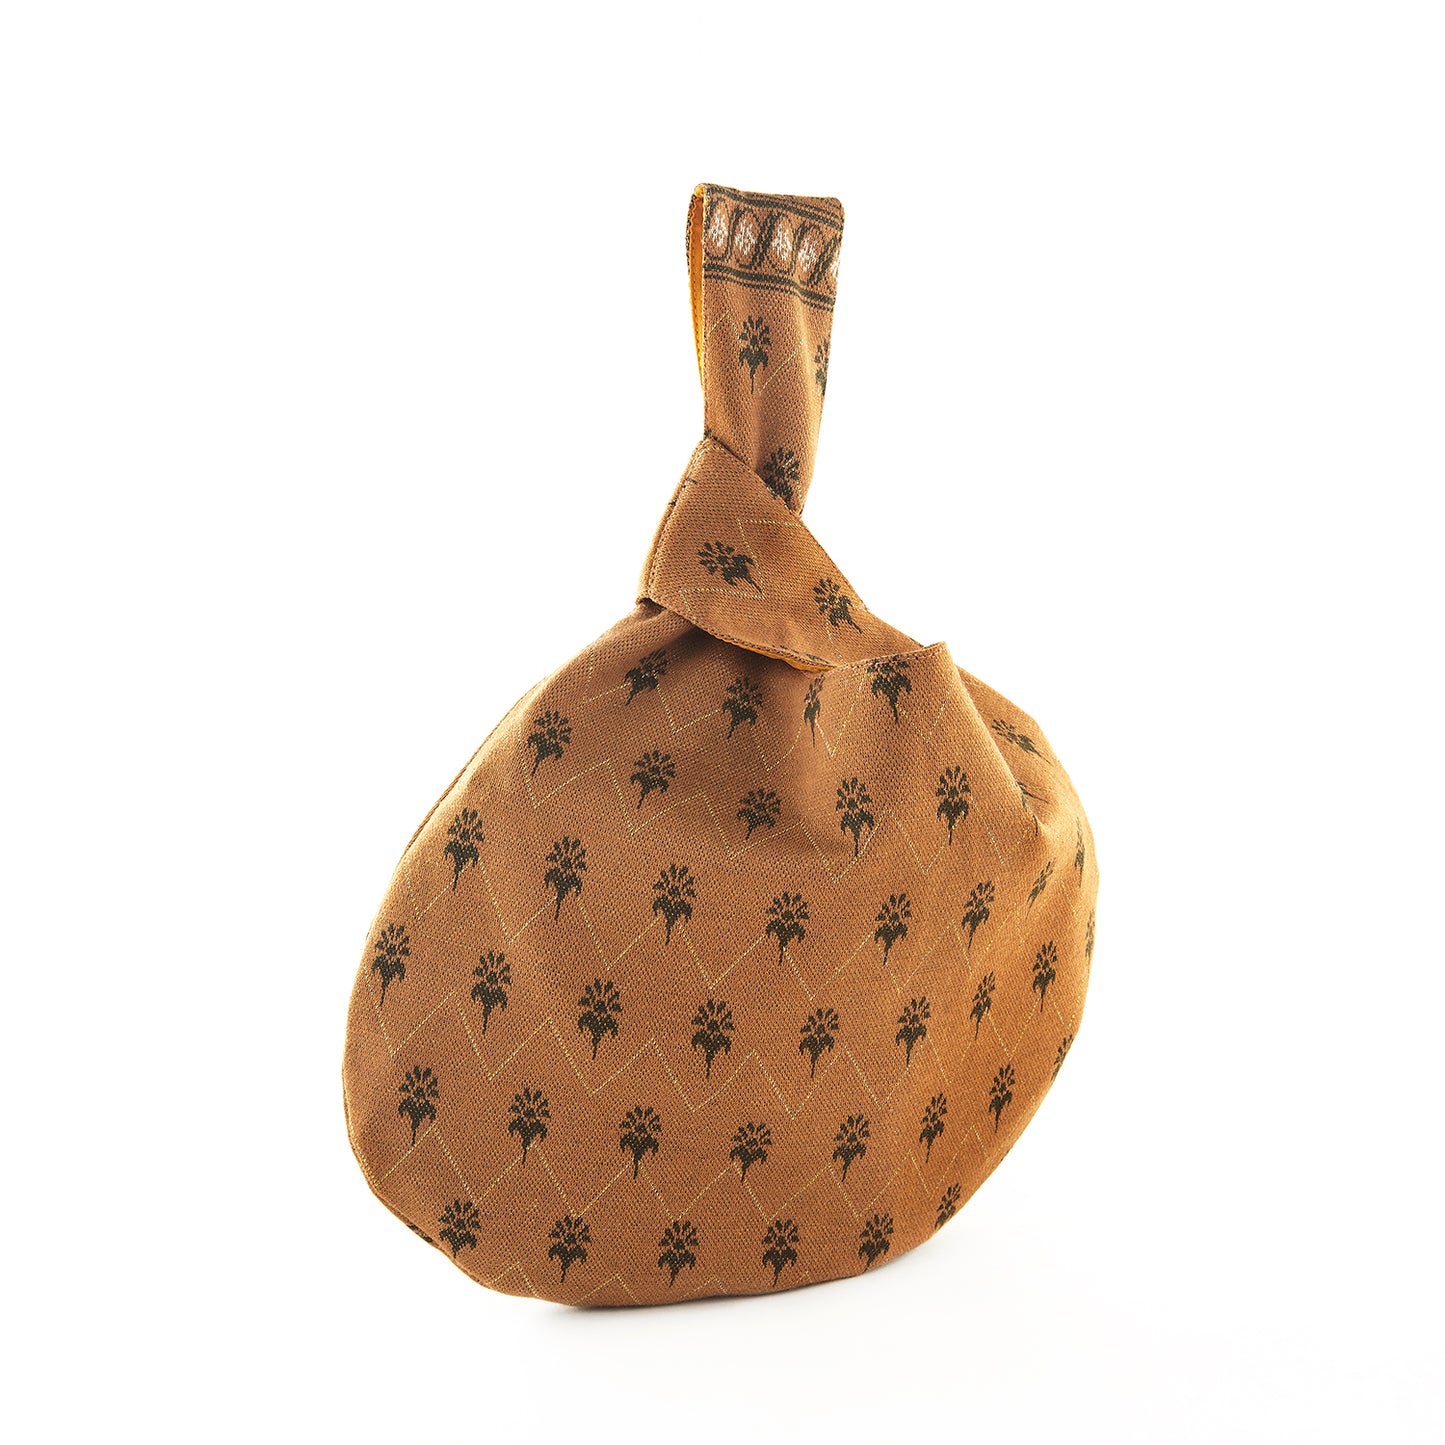 Tawny Brown colored designed Japanese Knot Bag